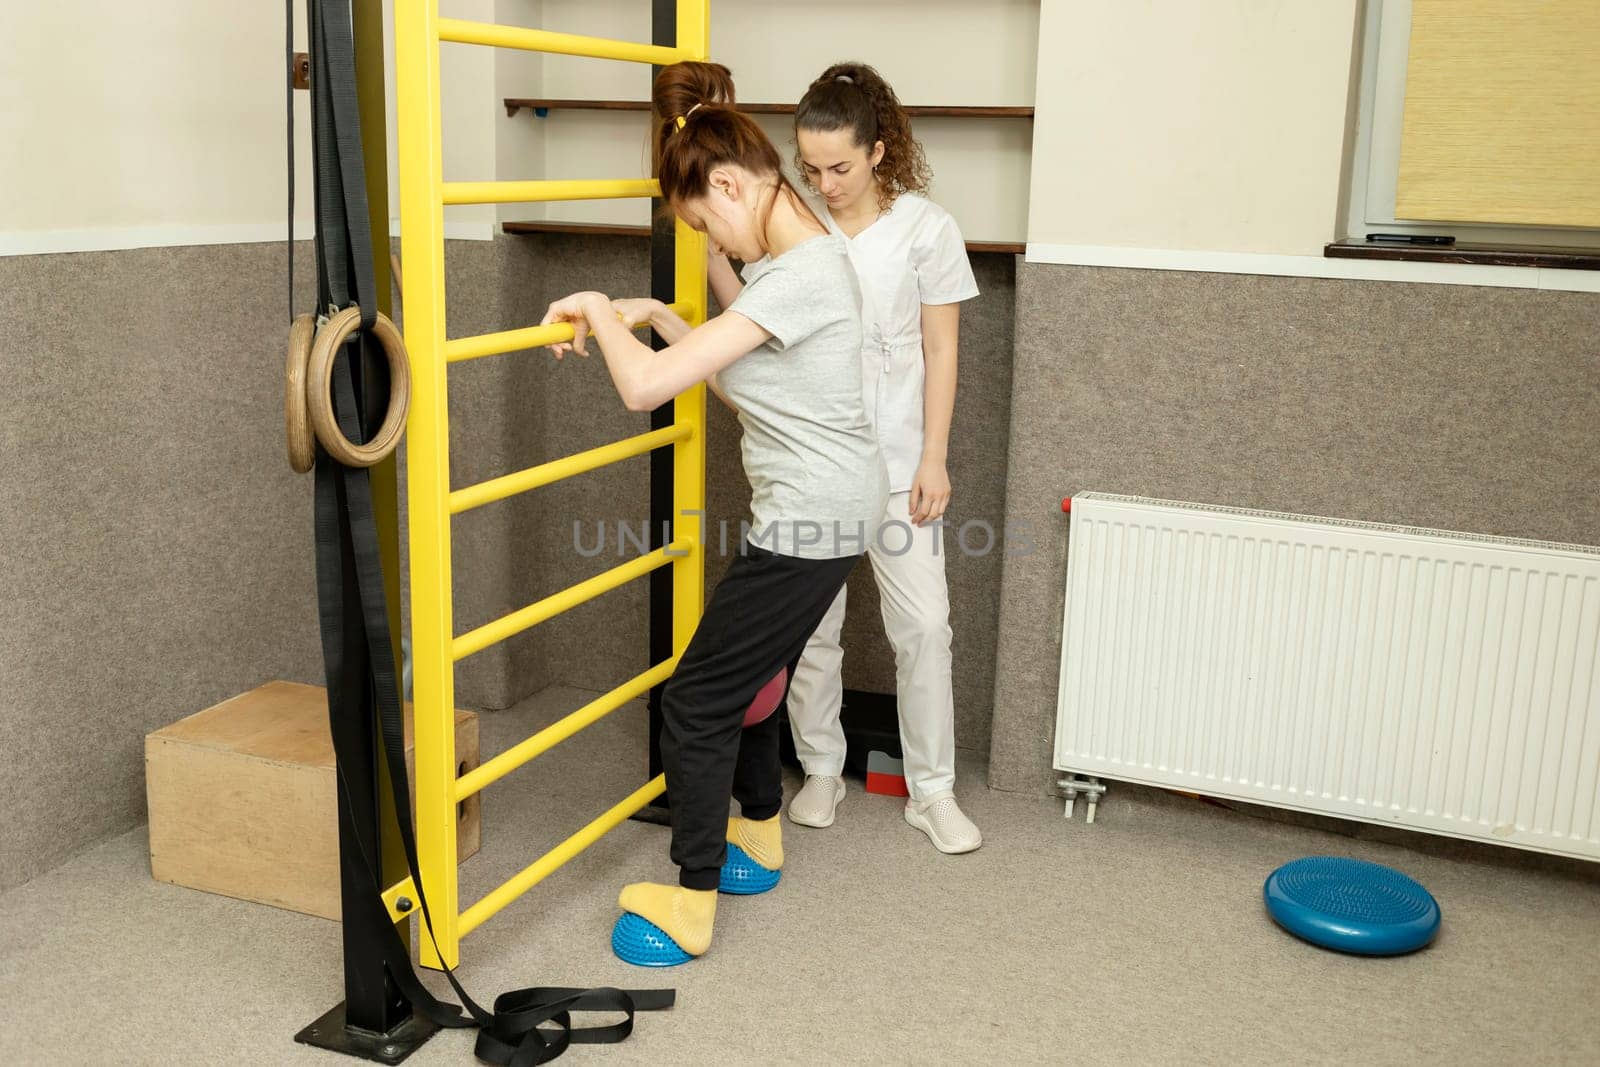 Disabled Teenage Girl With Doctor Does Physical Exercises In Rehabilitation Room. Child With Special Needs. Rehabilitation. Cerebral Palsy. Motor Disorder. Horizontal plane. High quality photo